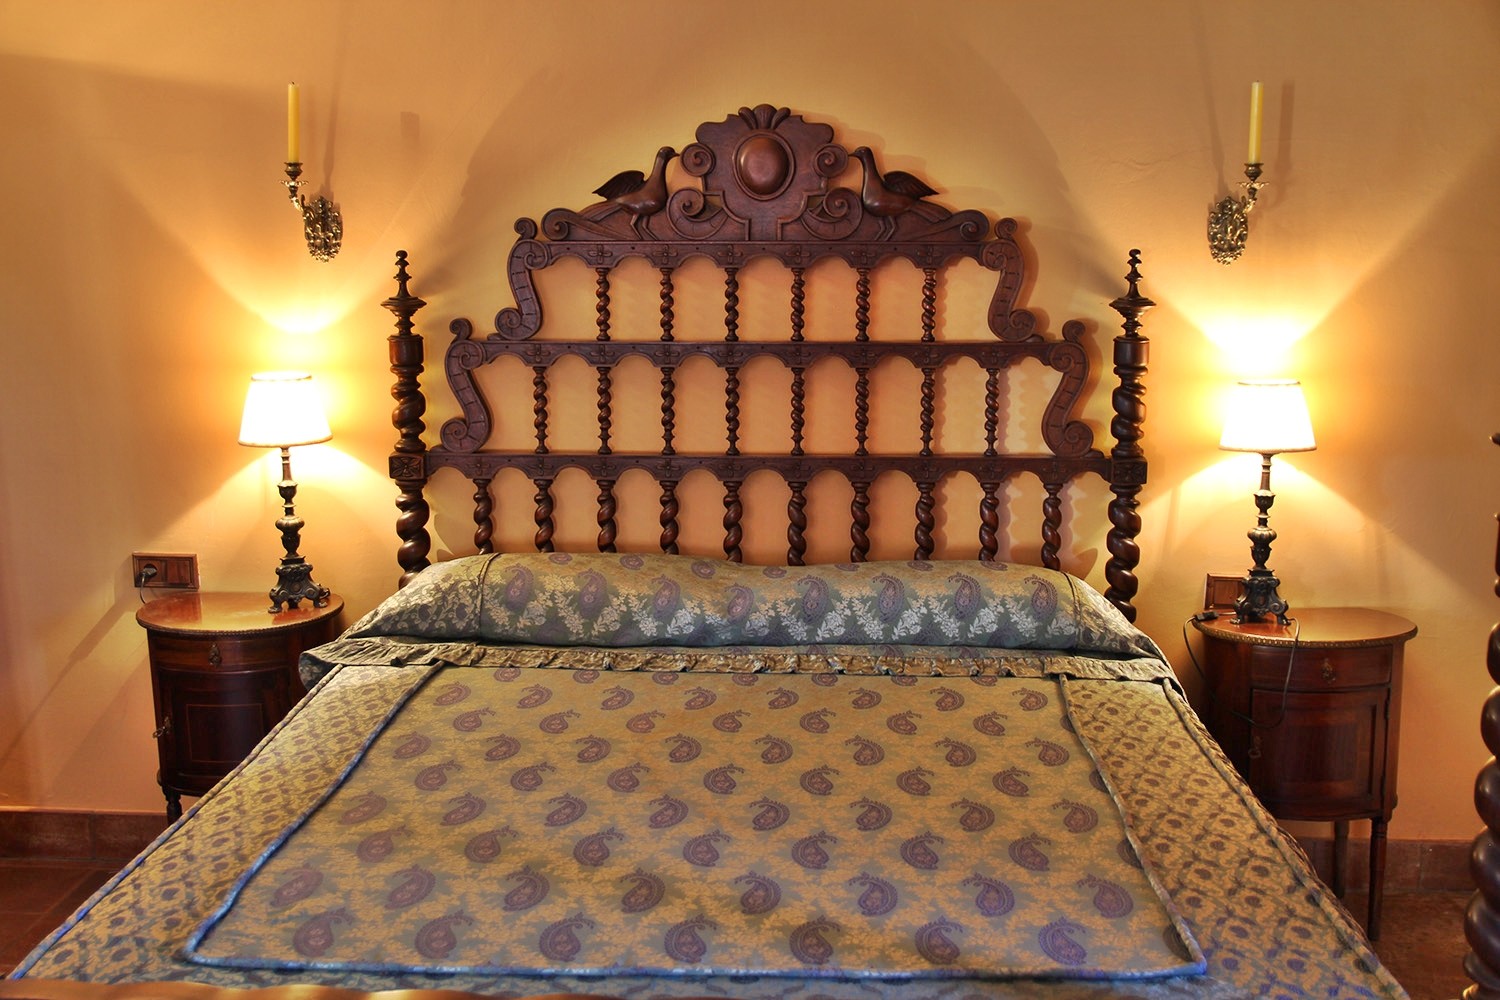 The 200 year old bed